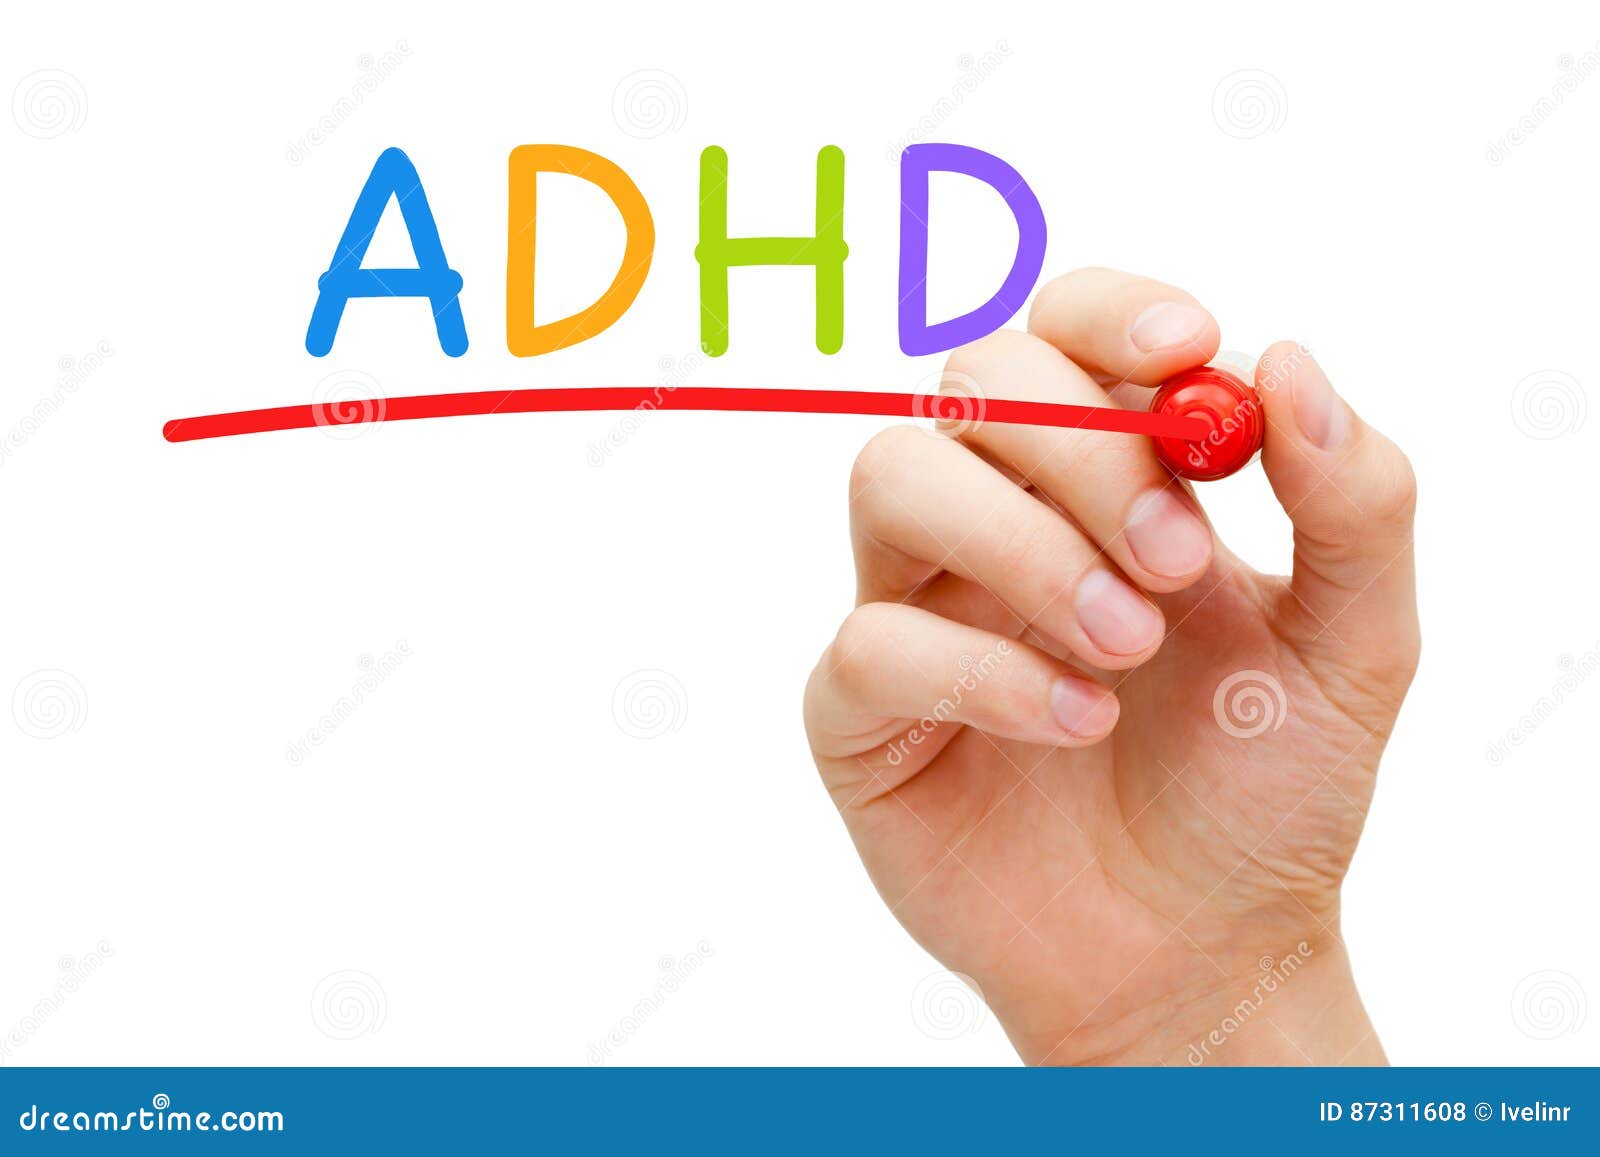 adhd attention deficit hyperactivity disorder